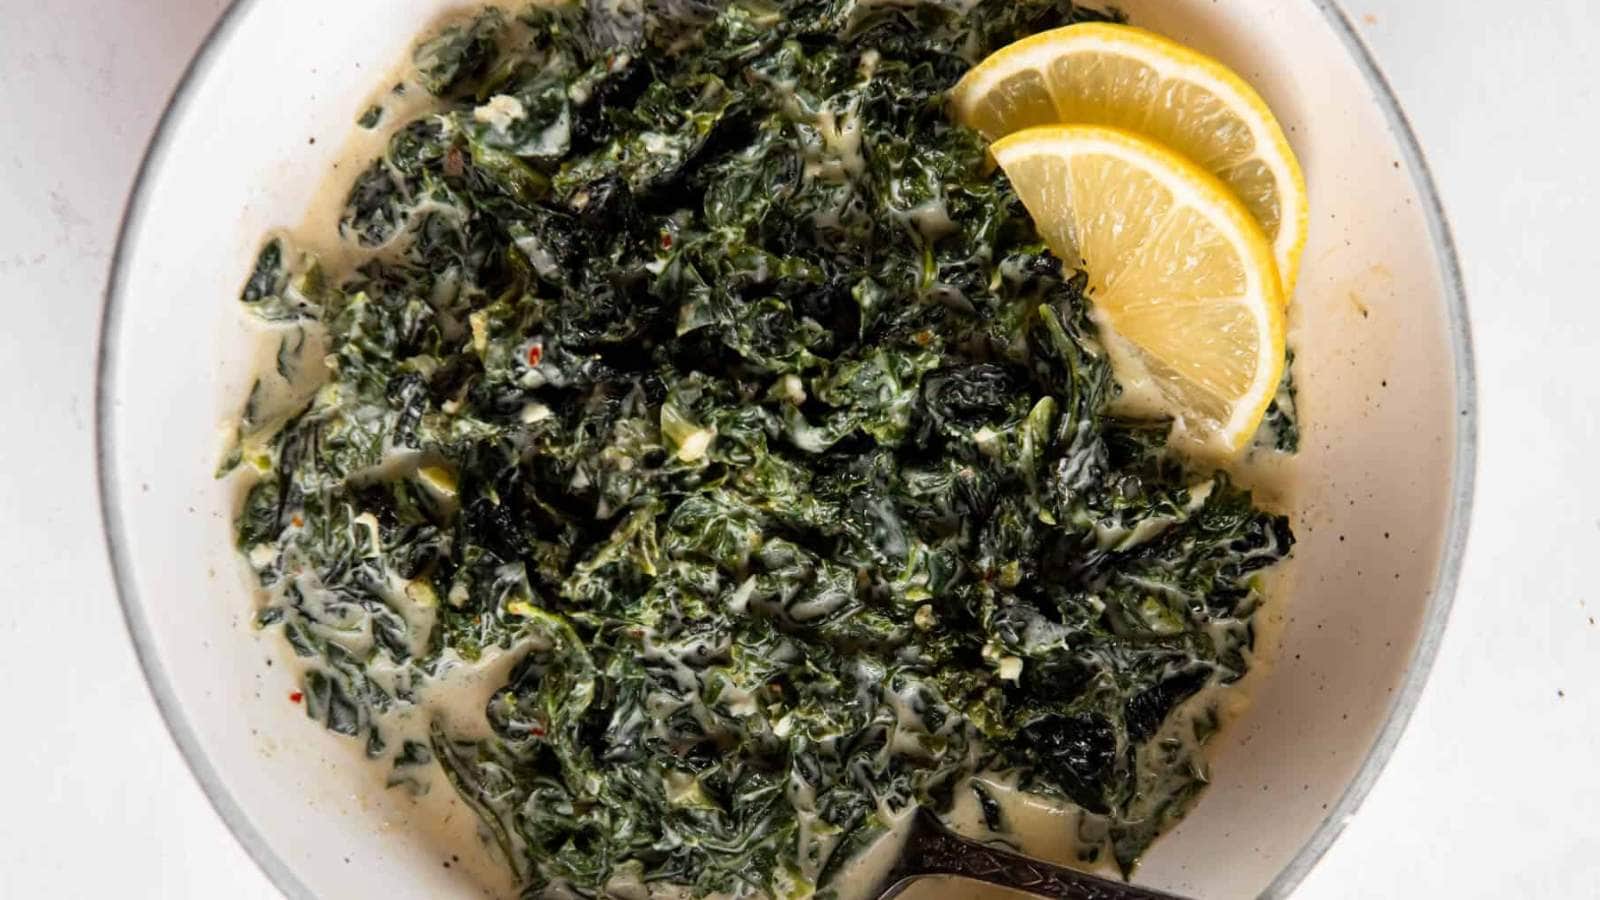 Creamed Kale recipe by Spoon Full of Flavor.